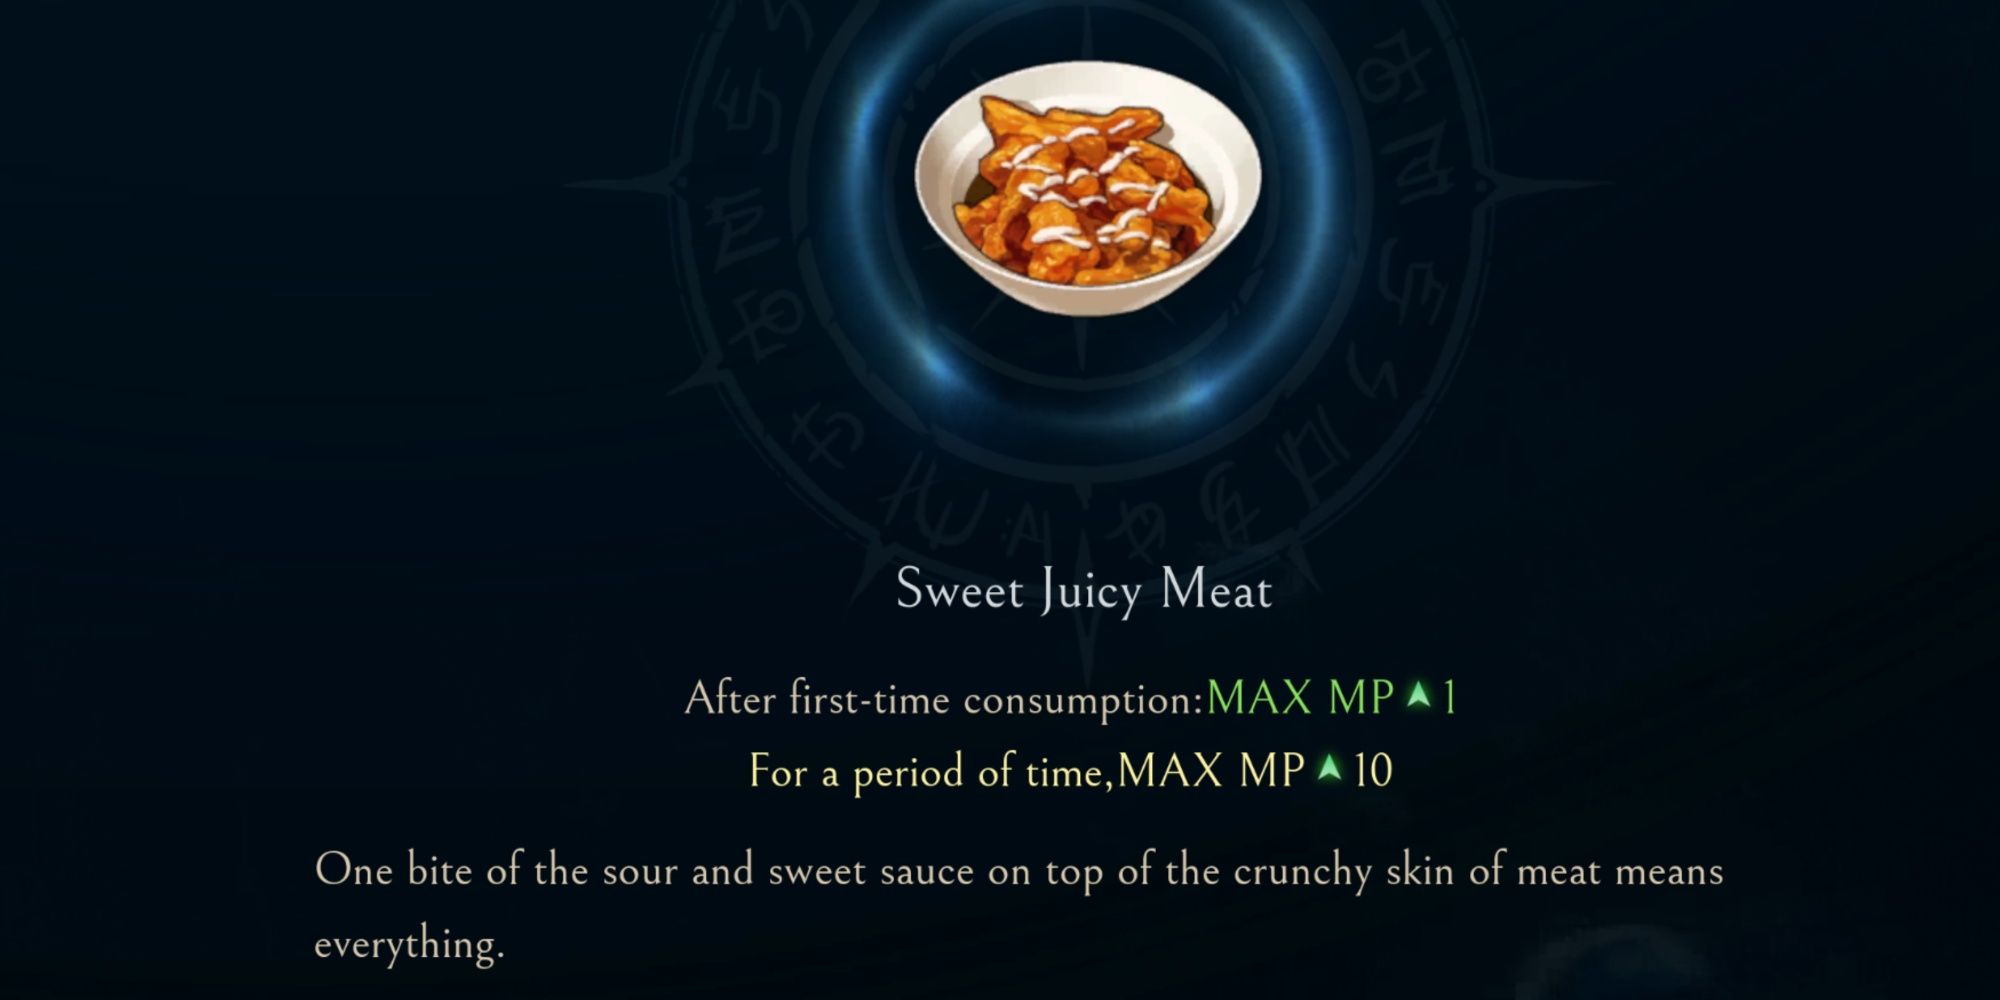 The Sweet Juicy Meat Recipe in Afterimage and its ability to increase your Max MP